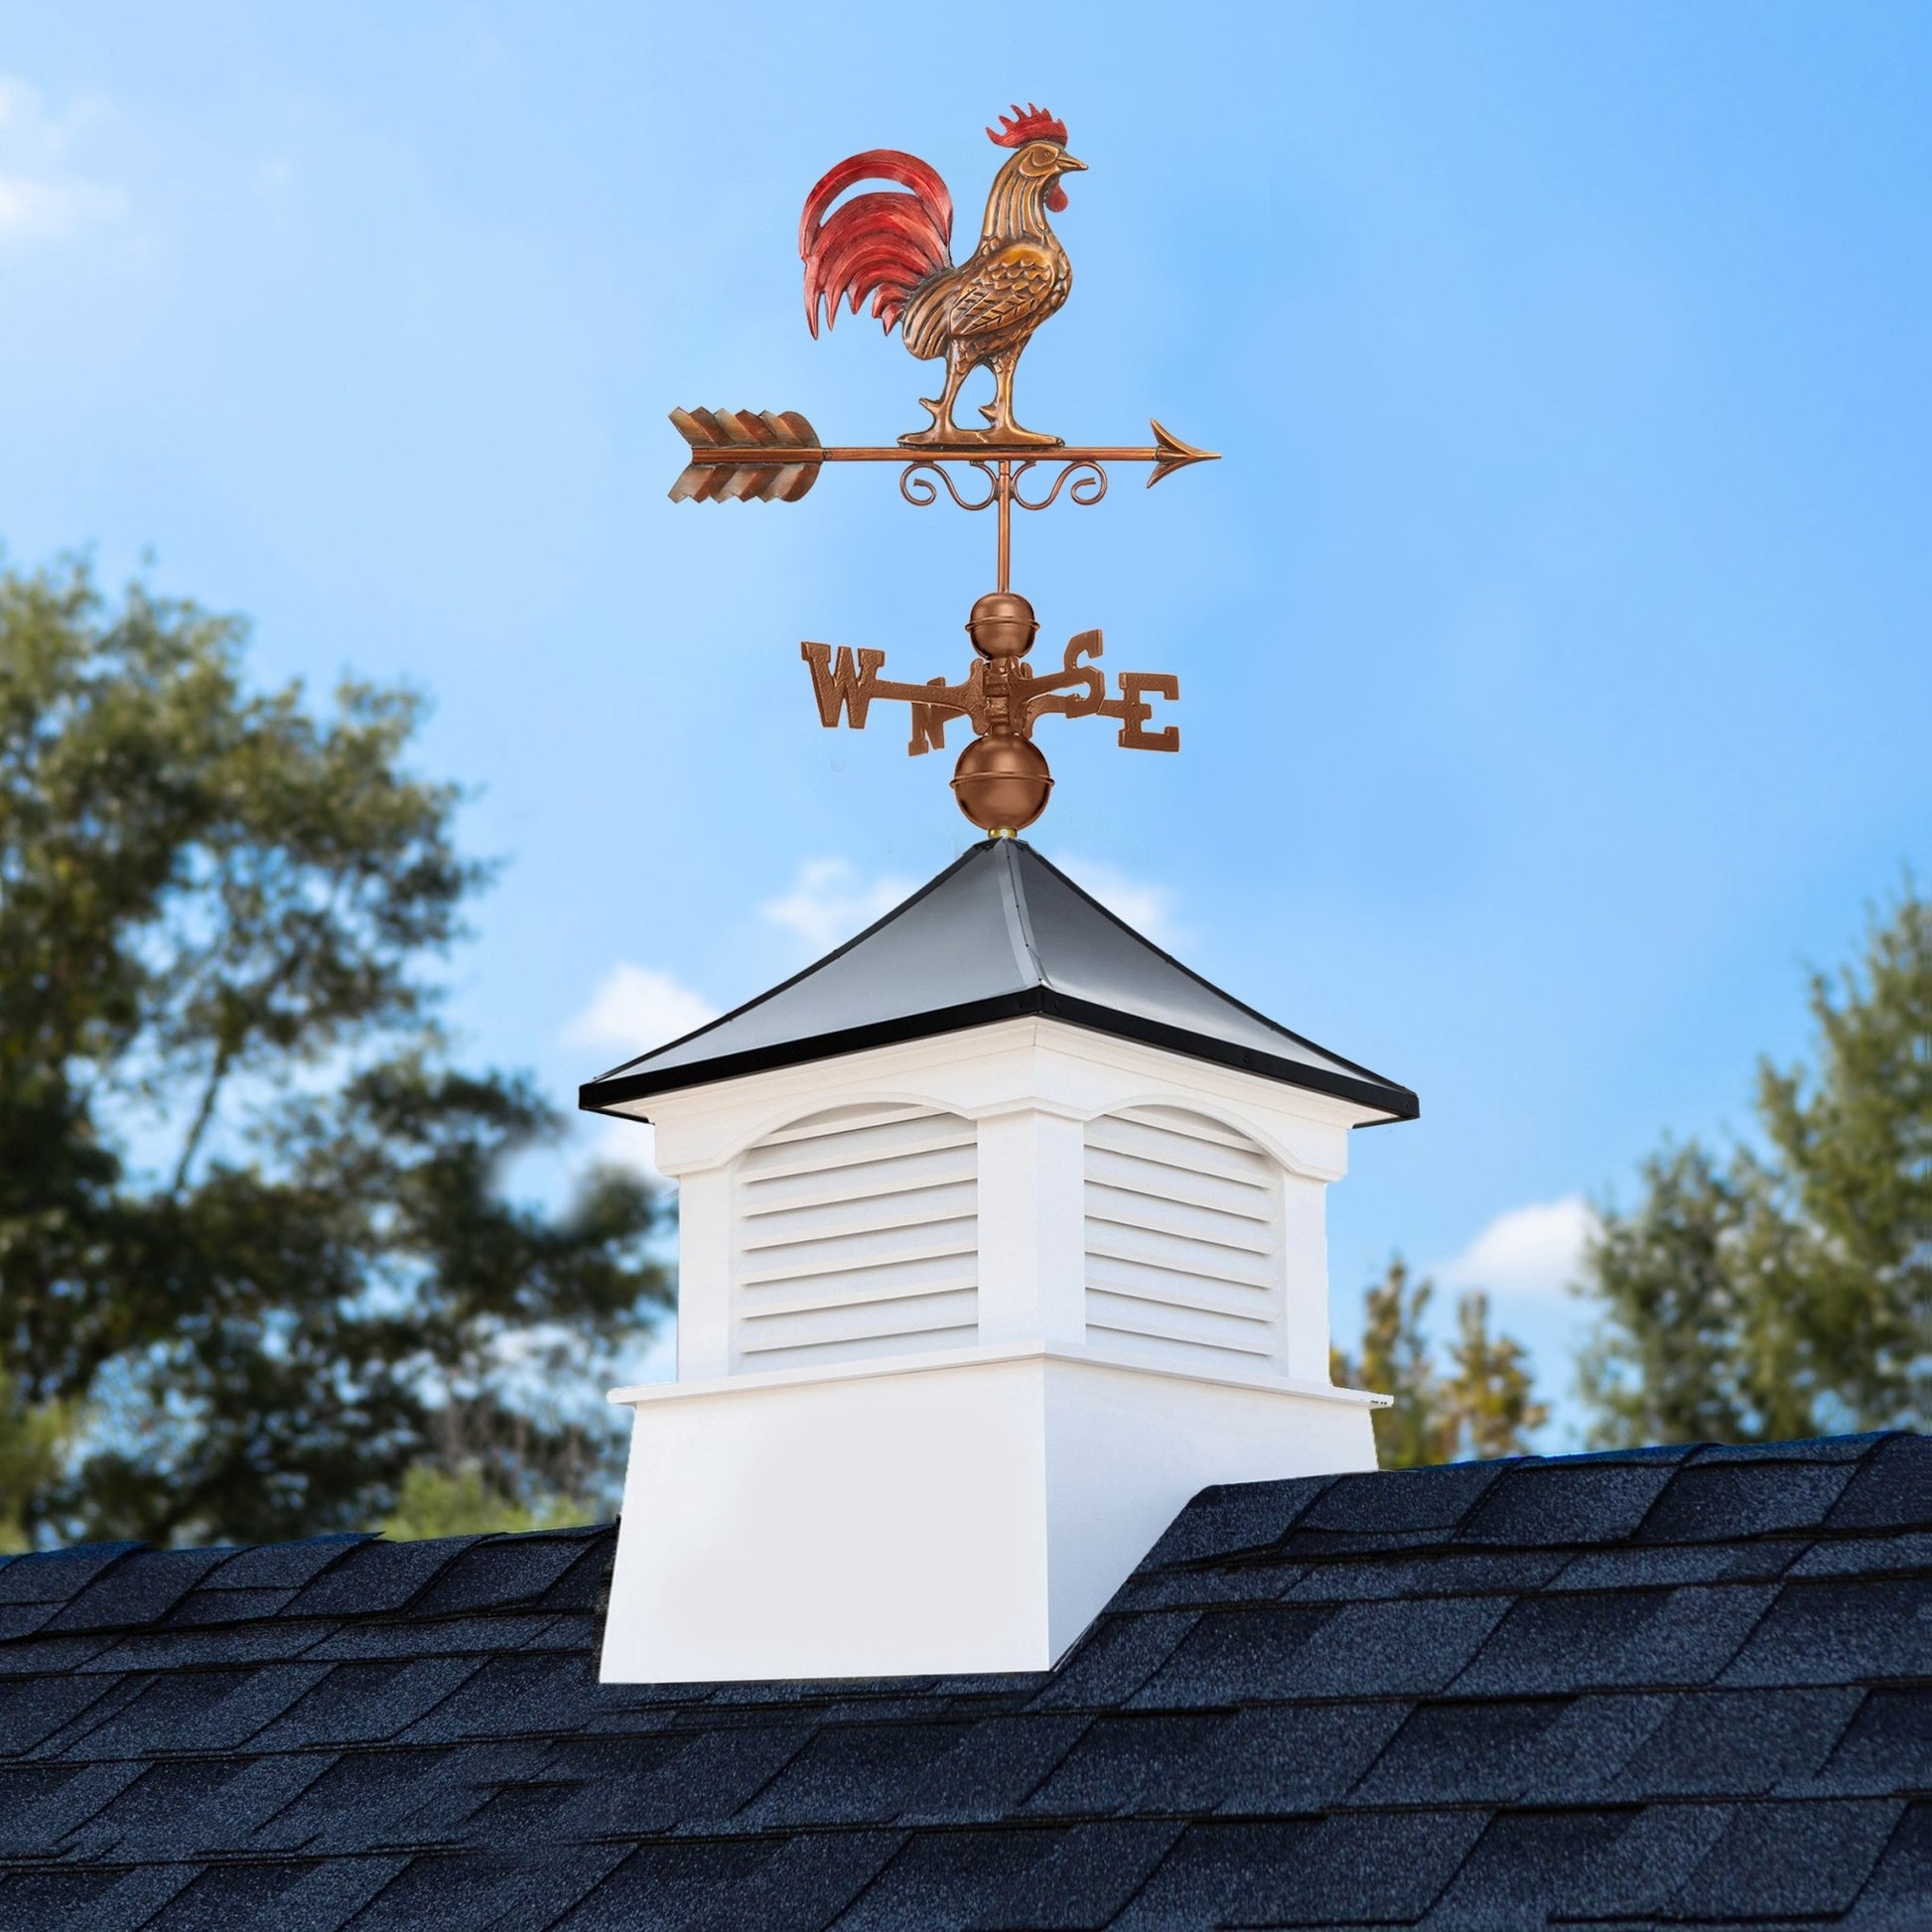 18" Square Coventry Vinyl Cupola with Black Aluminum Roof and Red Rooster Weathervane by Good Directions - Good Directions